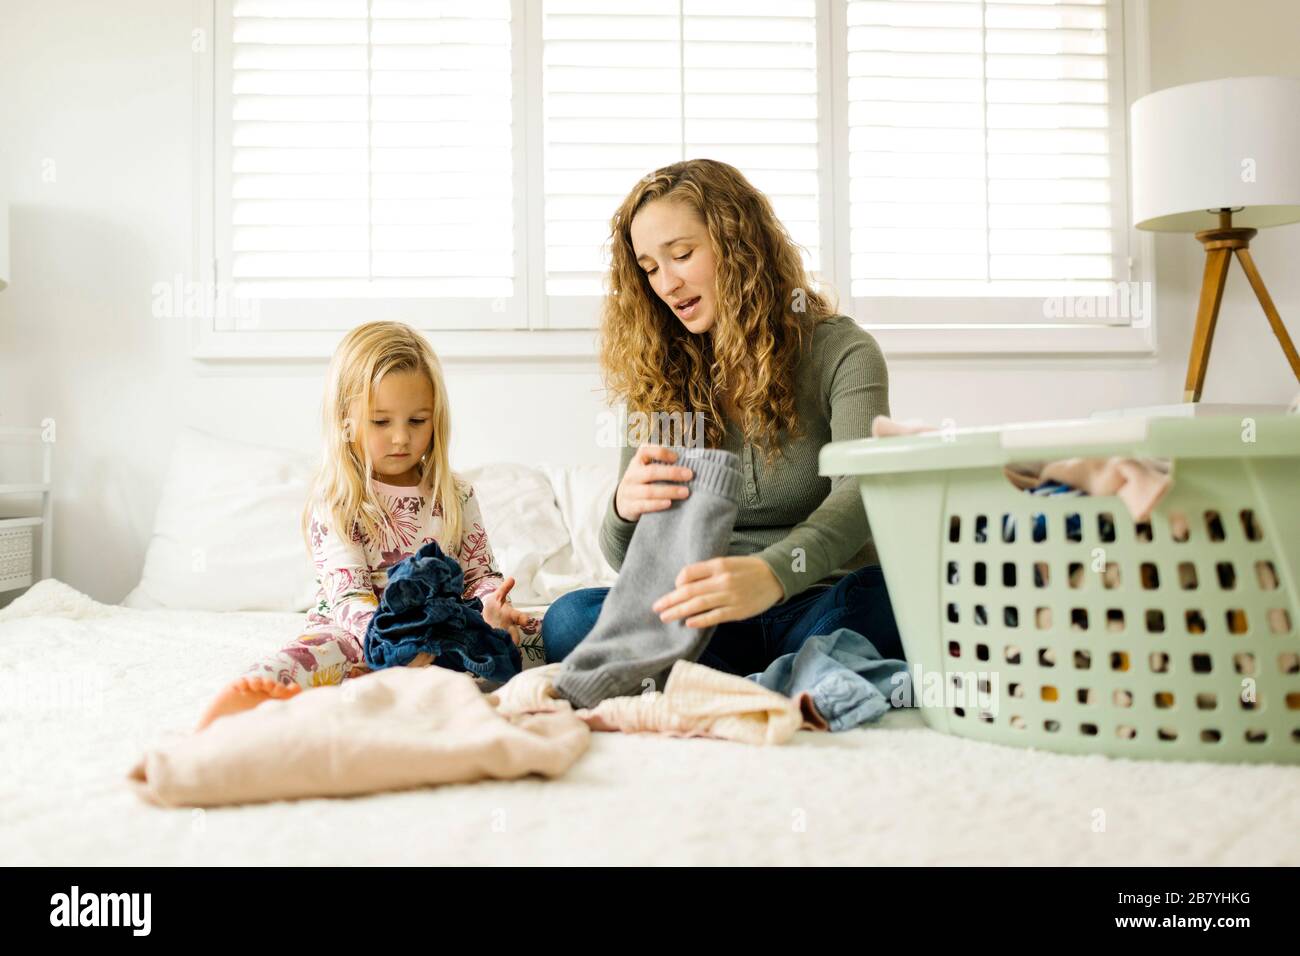 Mother and daughter folding laundry on bed Stock Photo